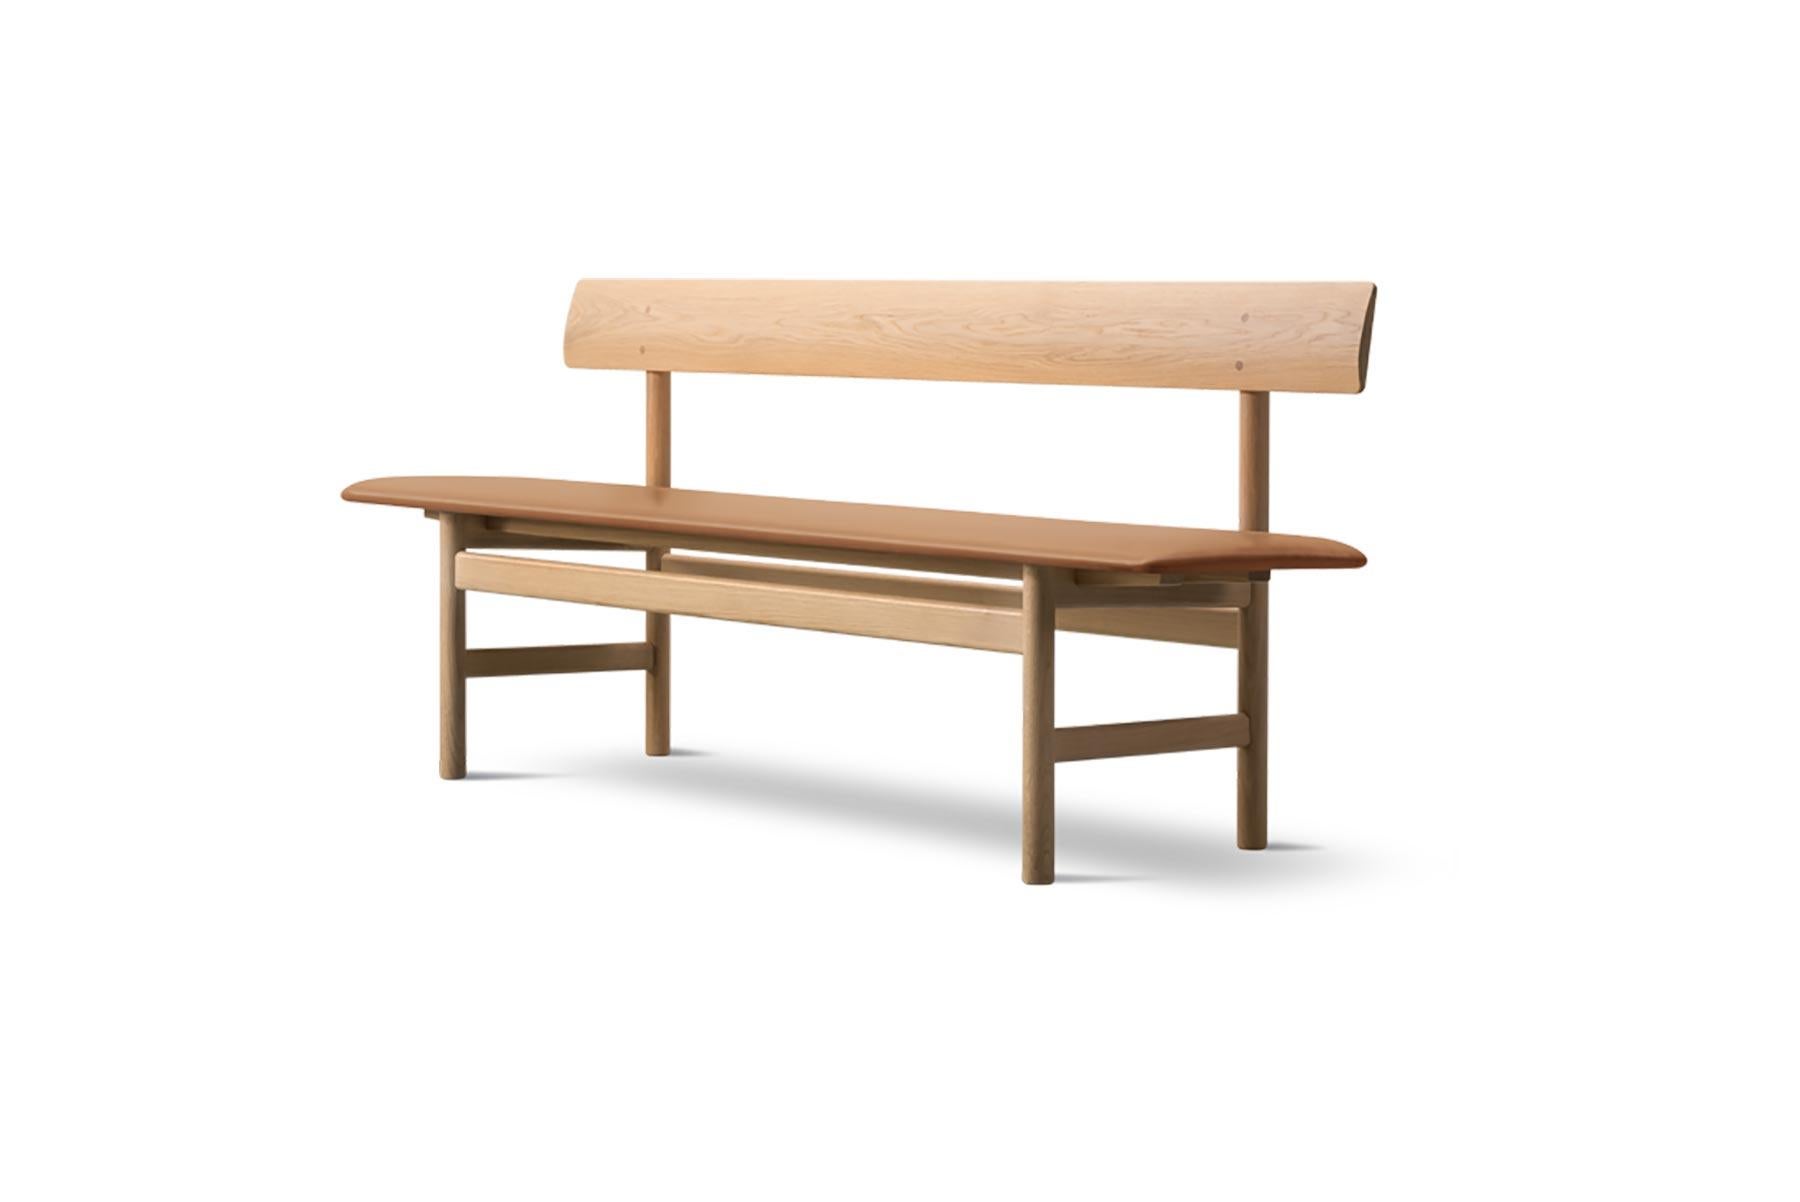 Børge Mogensen designed this solid wood dining bench in 1956. With its robust simplicity the bench is an ideal example of Mogensen’s lifelong drive for a purified shape.

 

 